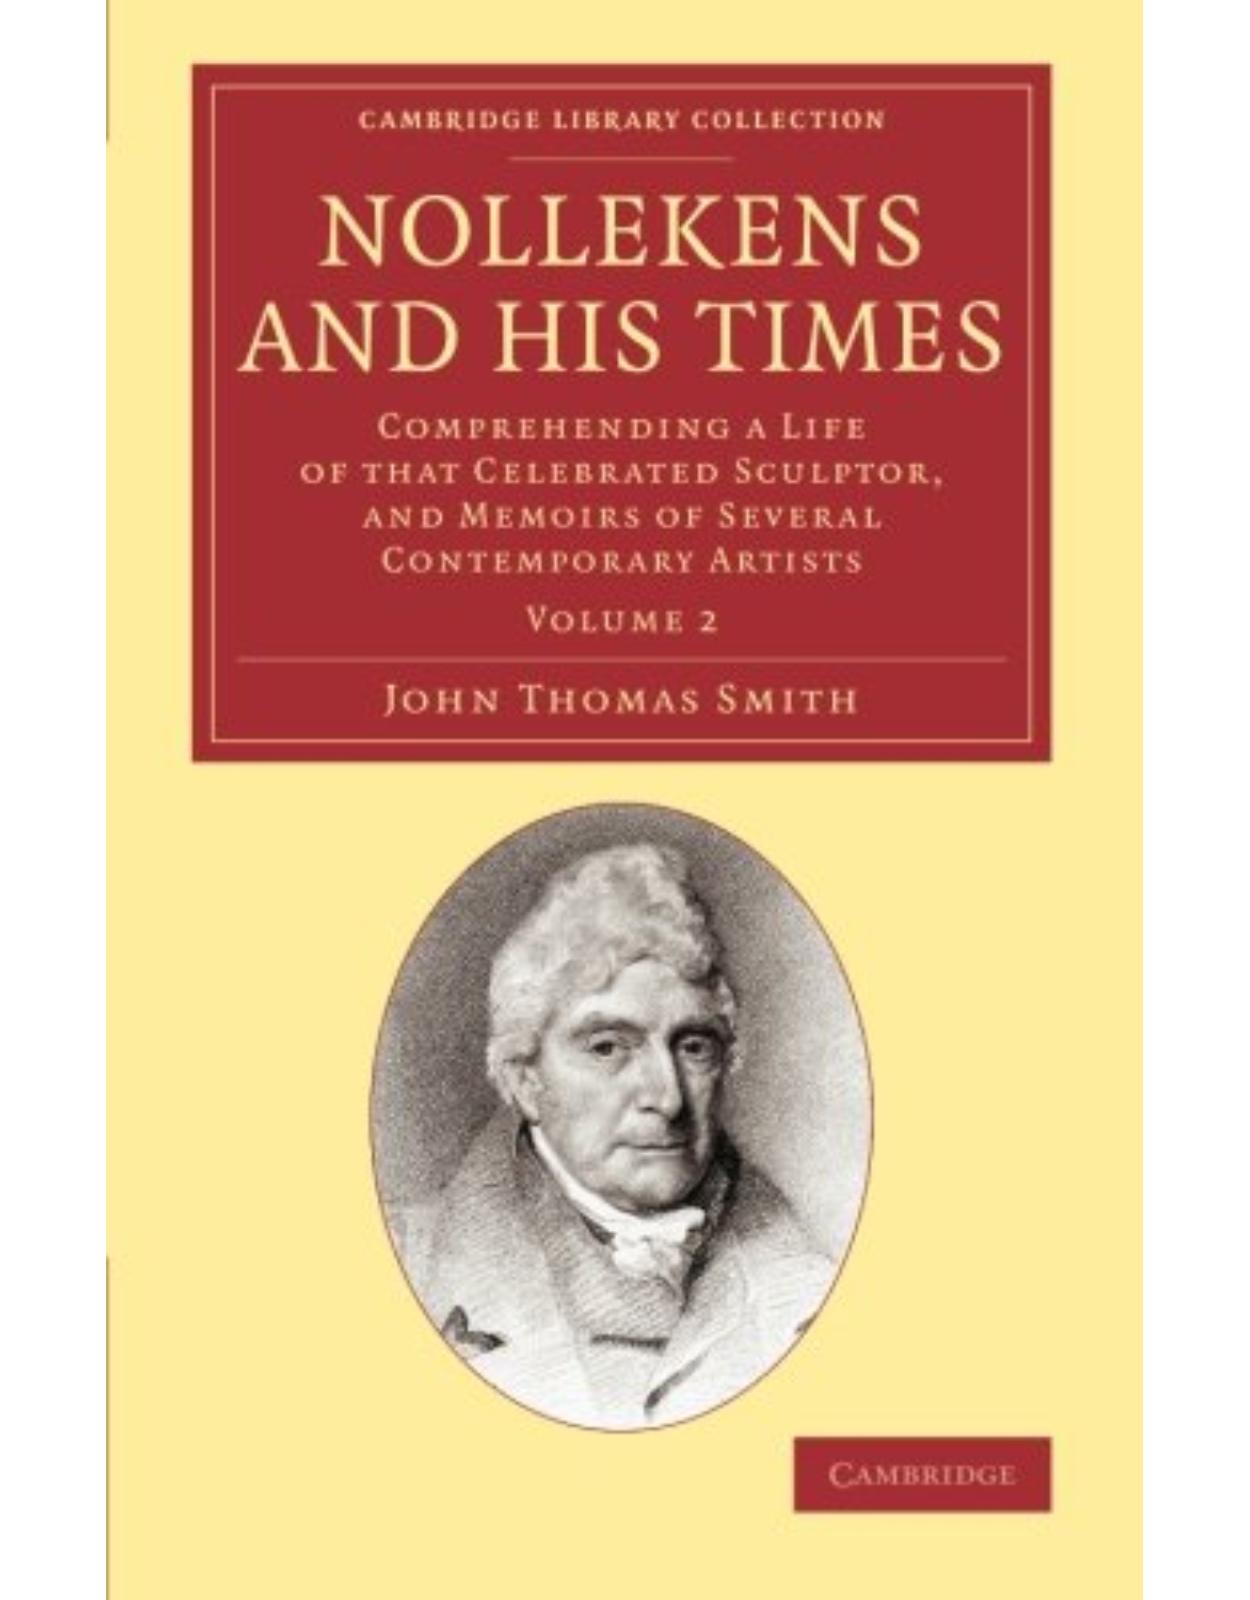 Nollekens and his Times: Comprehending a Life of that Celebrated Sculptor, and Memoirs of Several Contemporary Artists